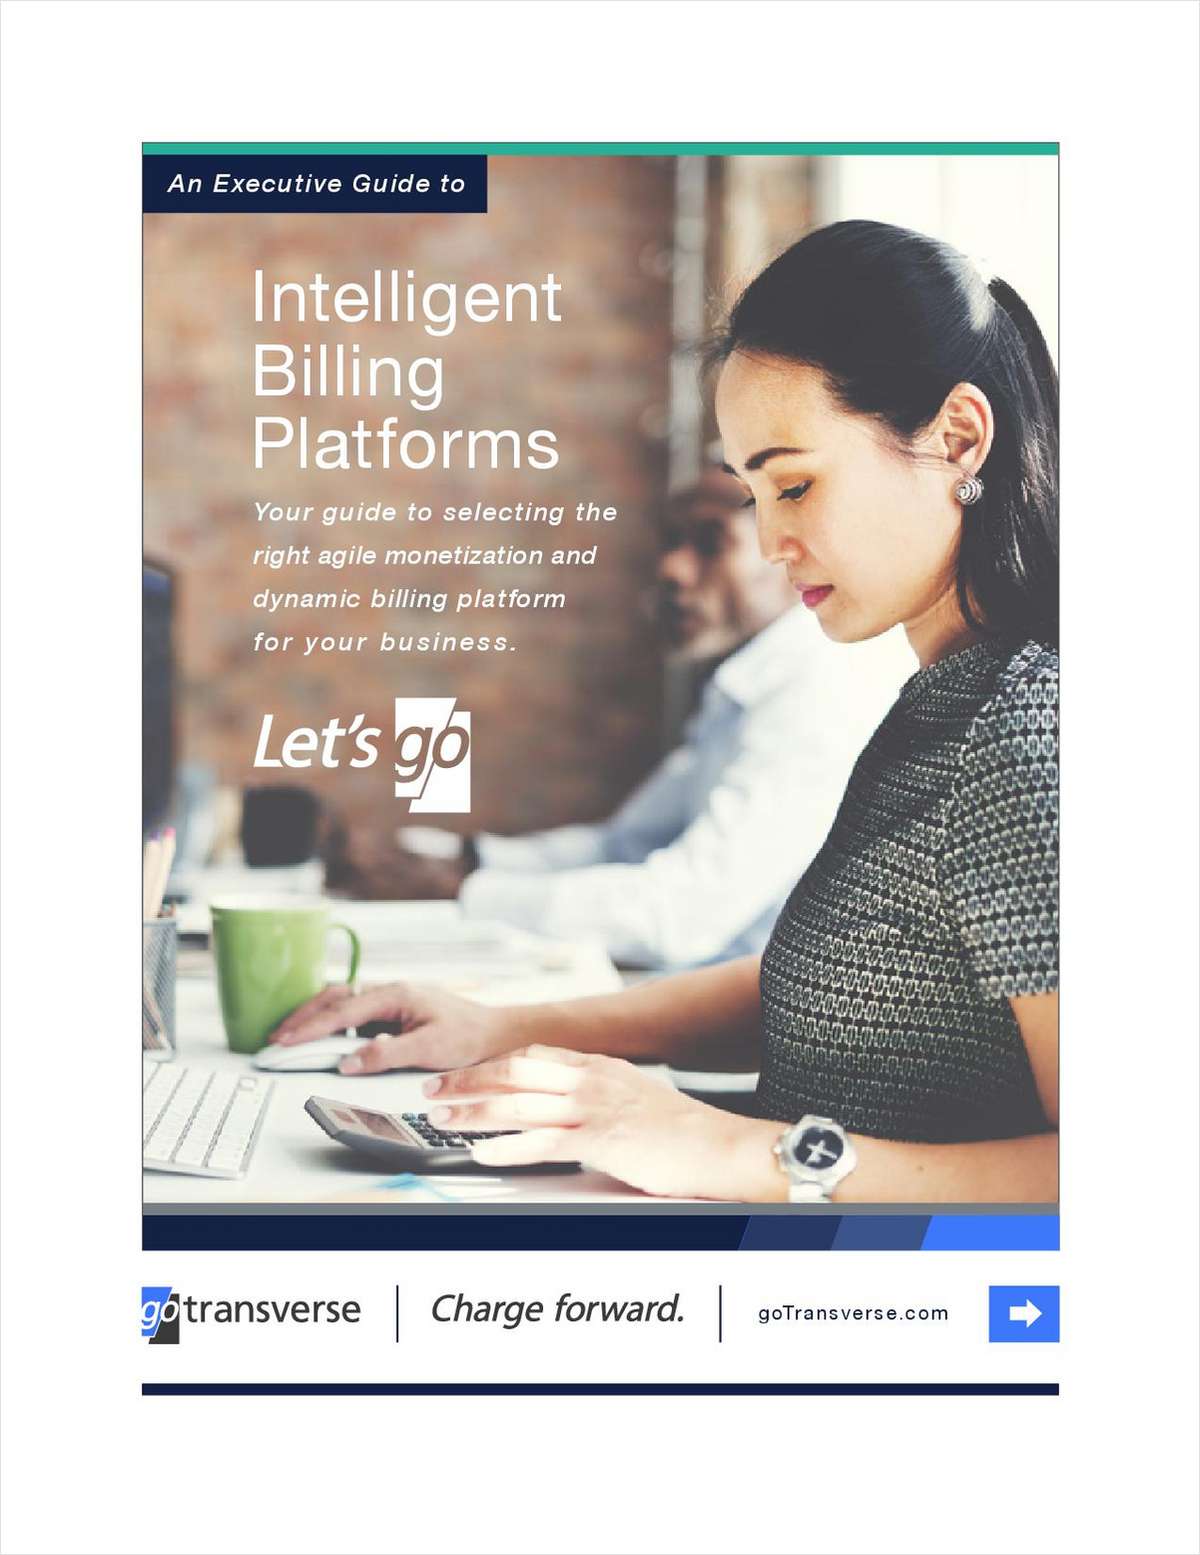 An Executive Buyer's Guide to Intelligent Billing